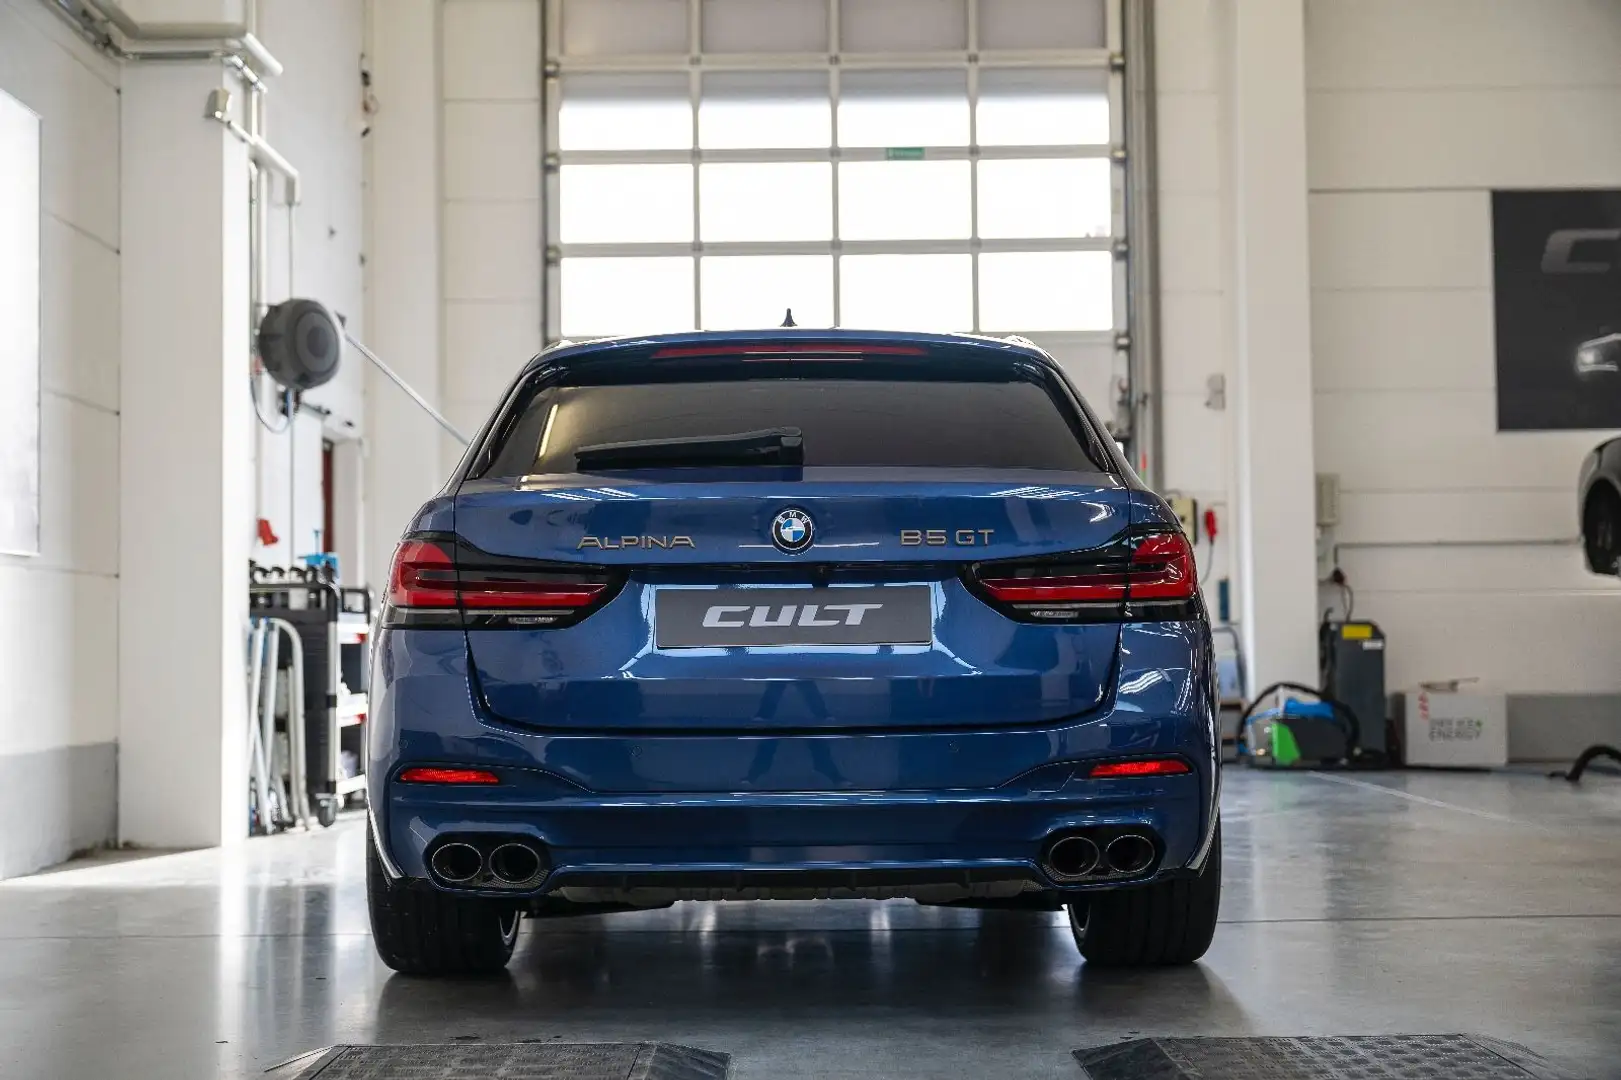 Alpina B5 GT Touring 1of250 limited Blue - 2